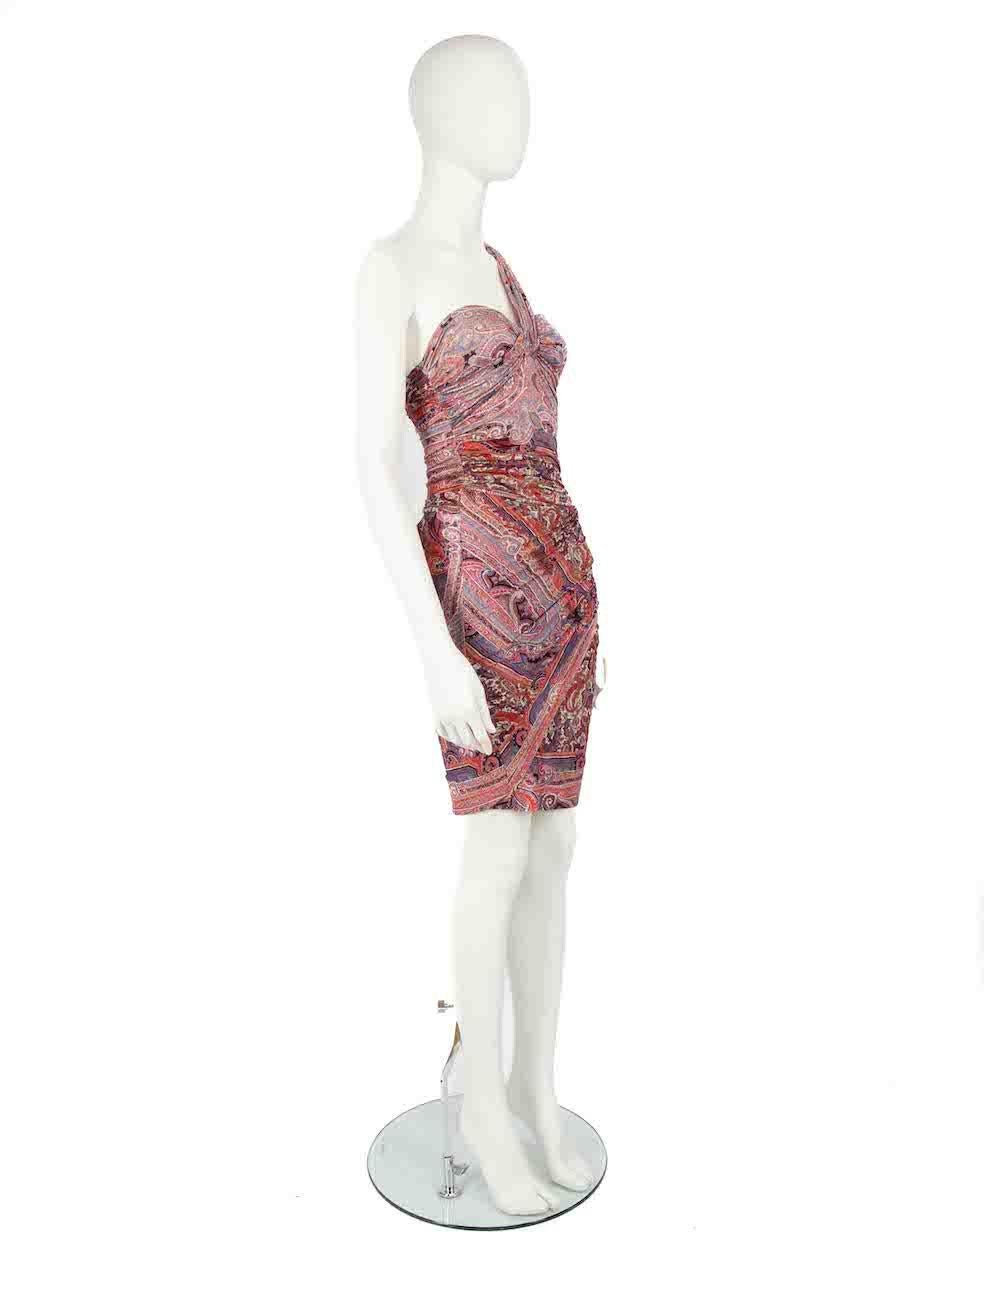 CONDITION is Very good. Hardly any visible wear to dress is evident on this used Isabel Marant designer resale item.
 
 Details
 Red
 Viscose
 Mini dress
 One shoulder
 Paisley print pattern
 Cut out detail on waist
 Ruched and stretchy
 
 
 Made in